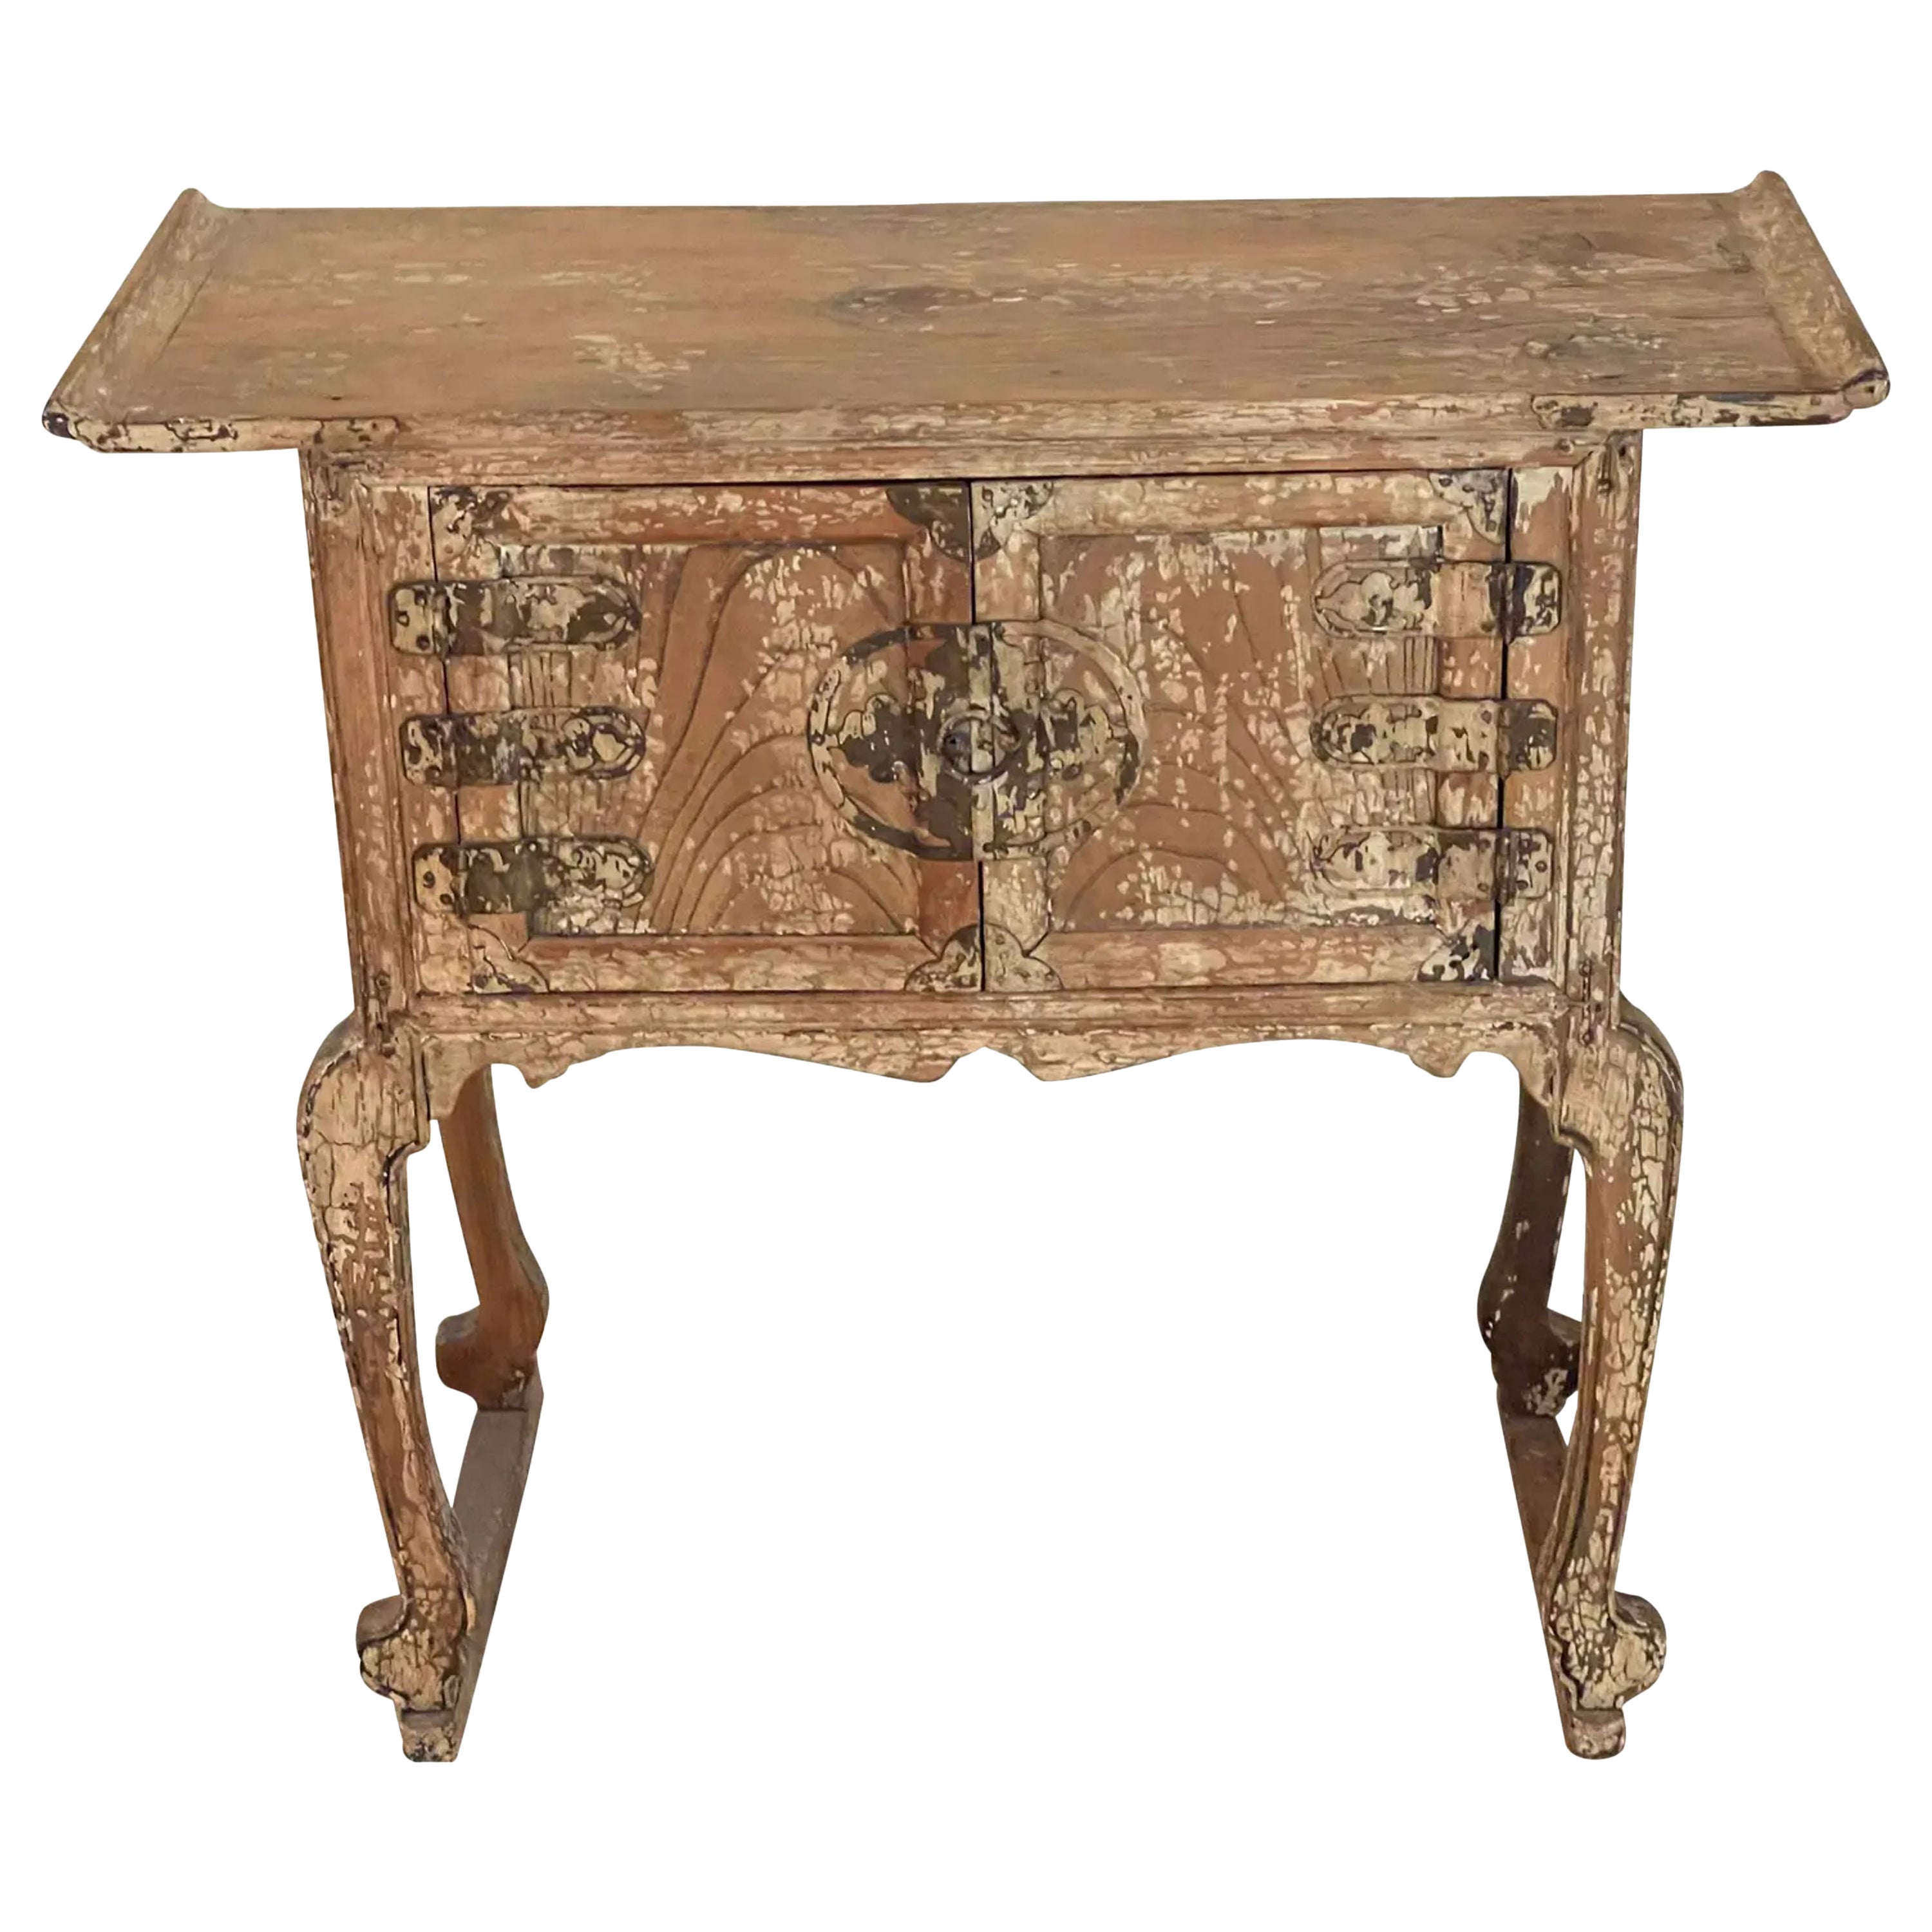 Antique Chinese Ming Style Side Table with Crackle Finish